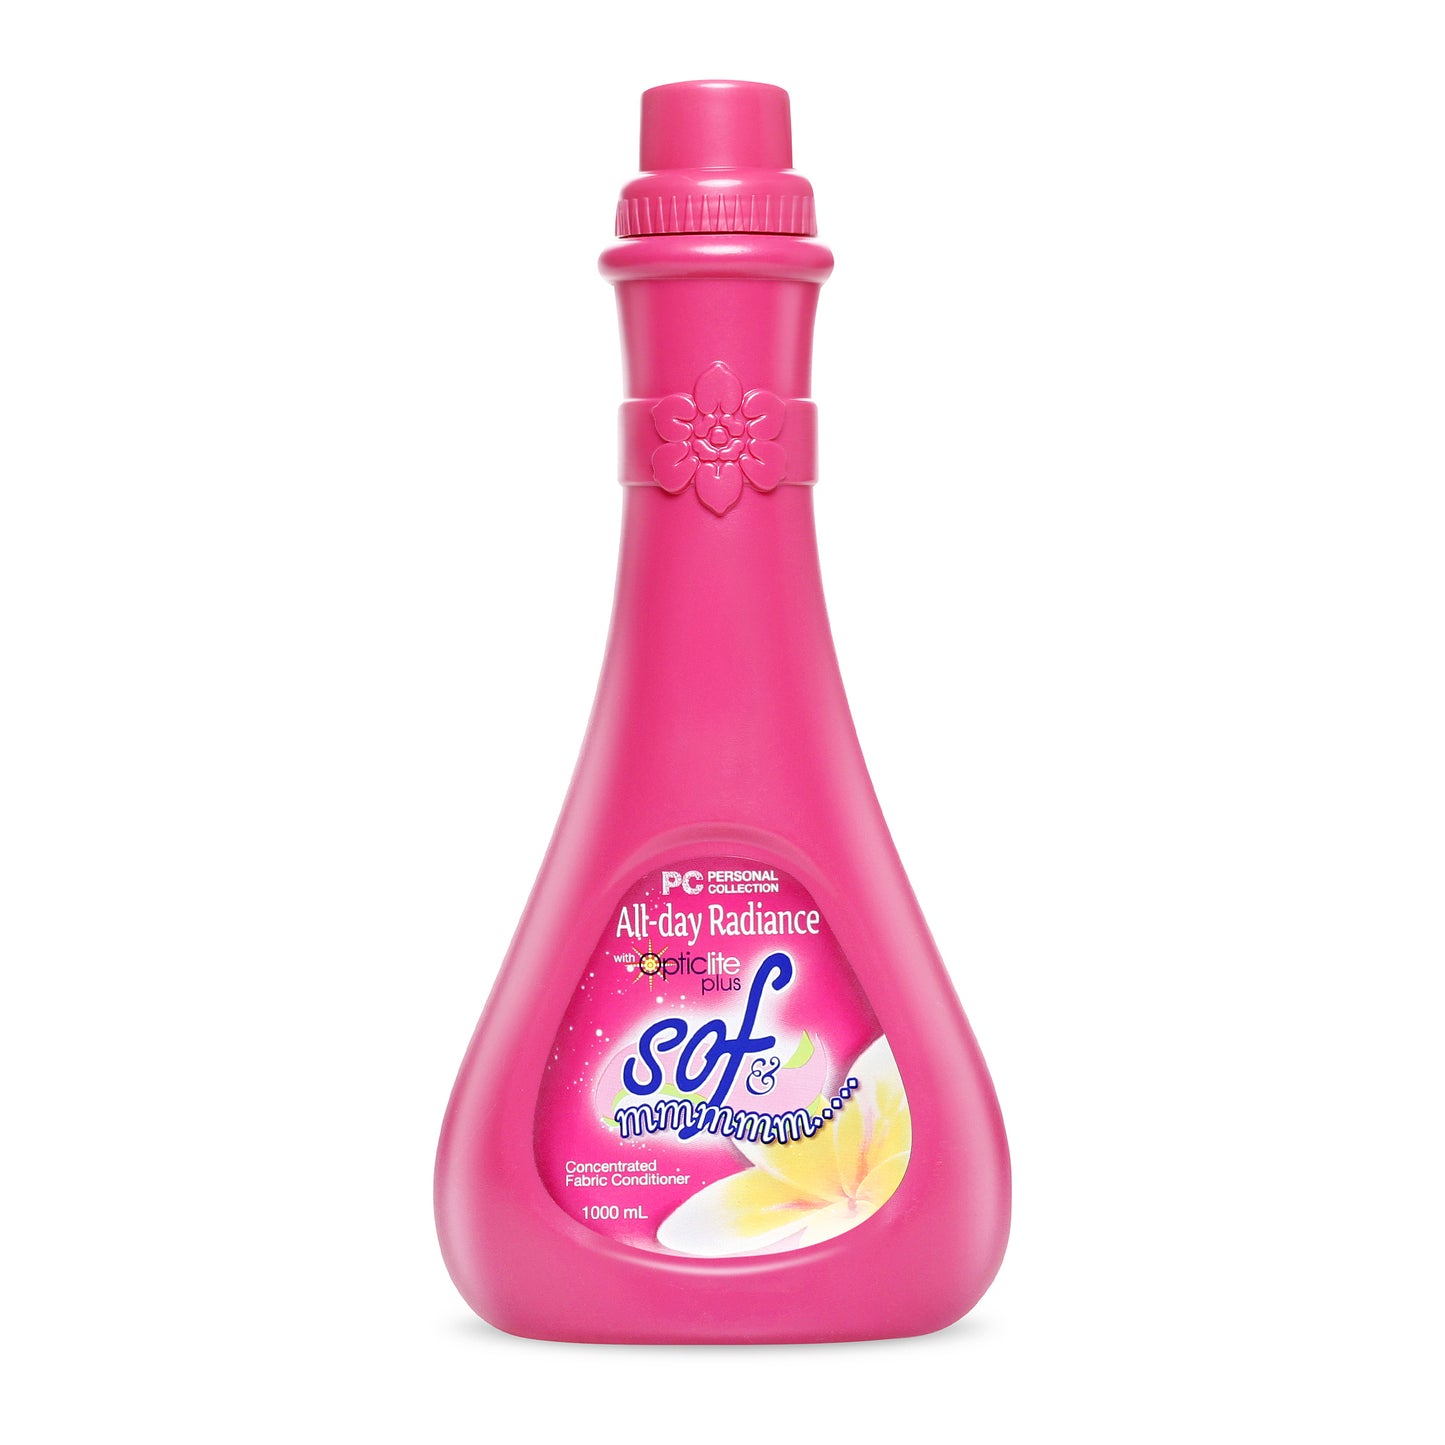 sof & mmmmm All-day Radiance Concentrated Fabric Conditioner 1000 mL